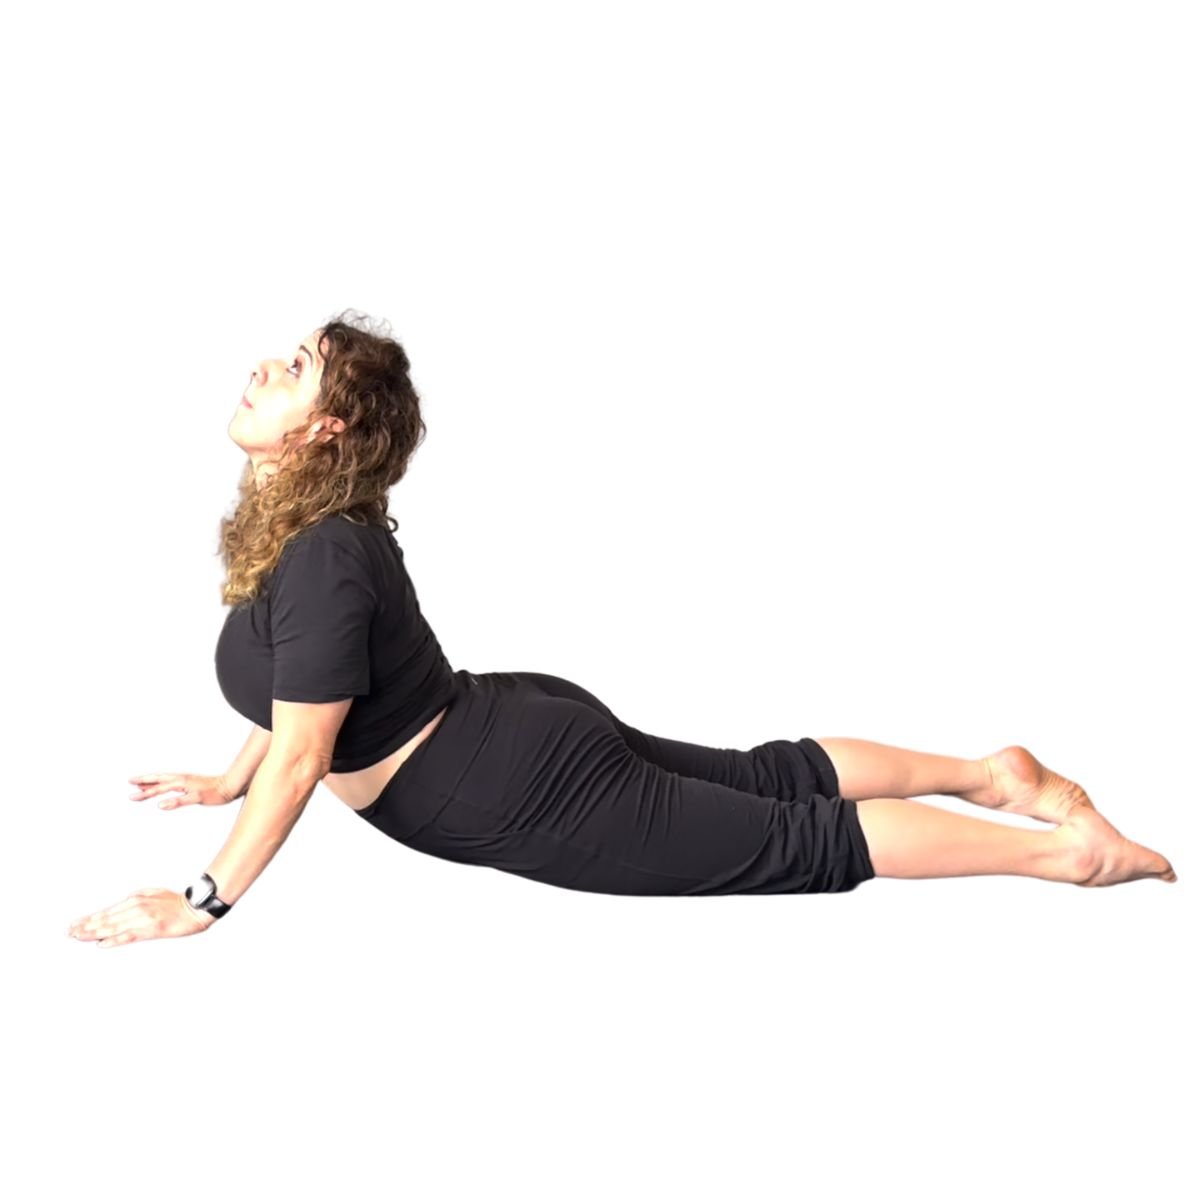 The Cobra Stretch, a yoga pose, stretches your abs and helps strengthen the  lower back. Hold at least 30 seconds (add more time as you get stronger).